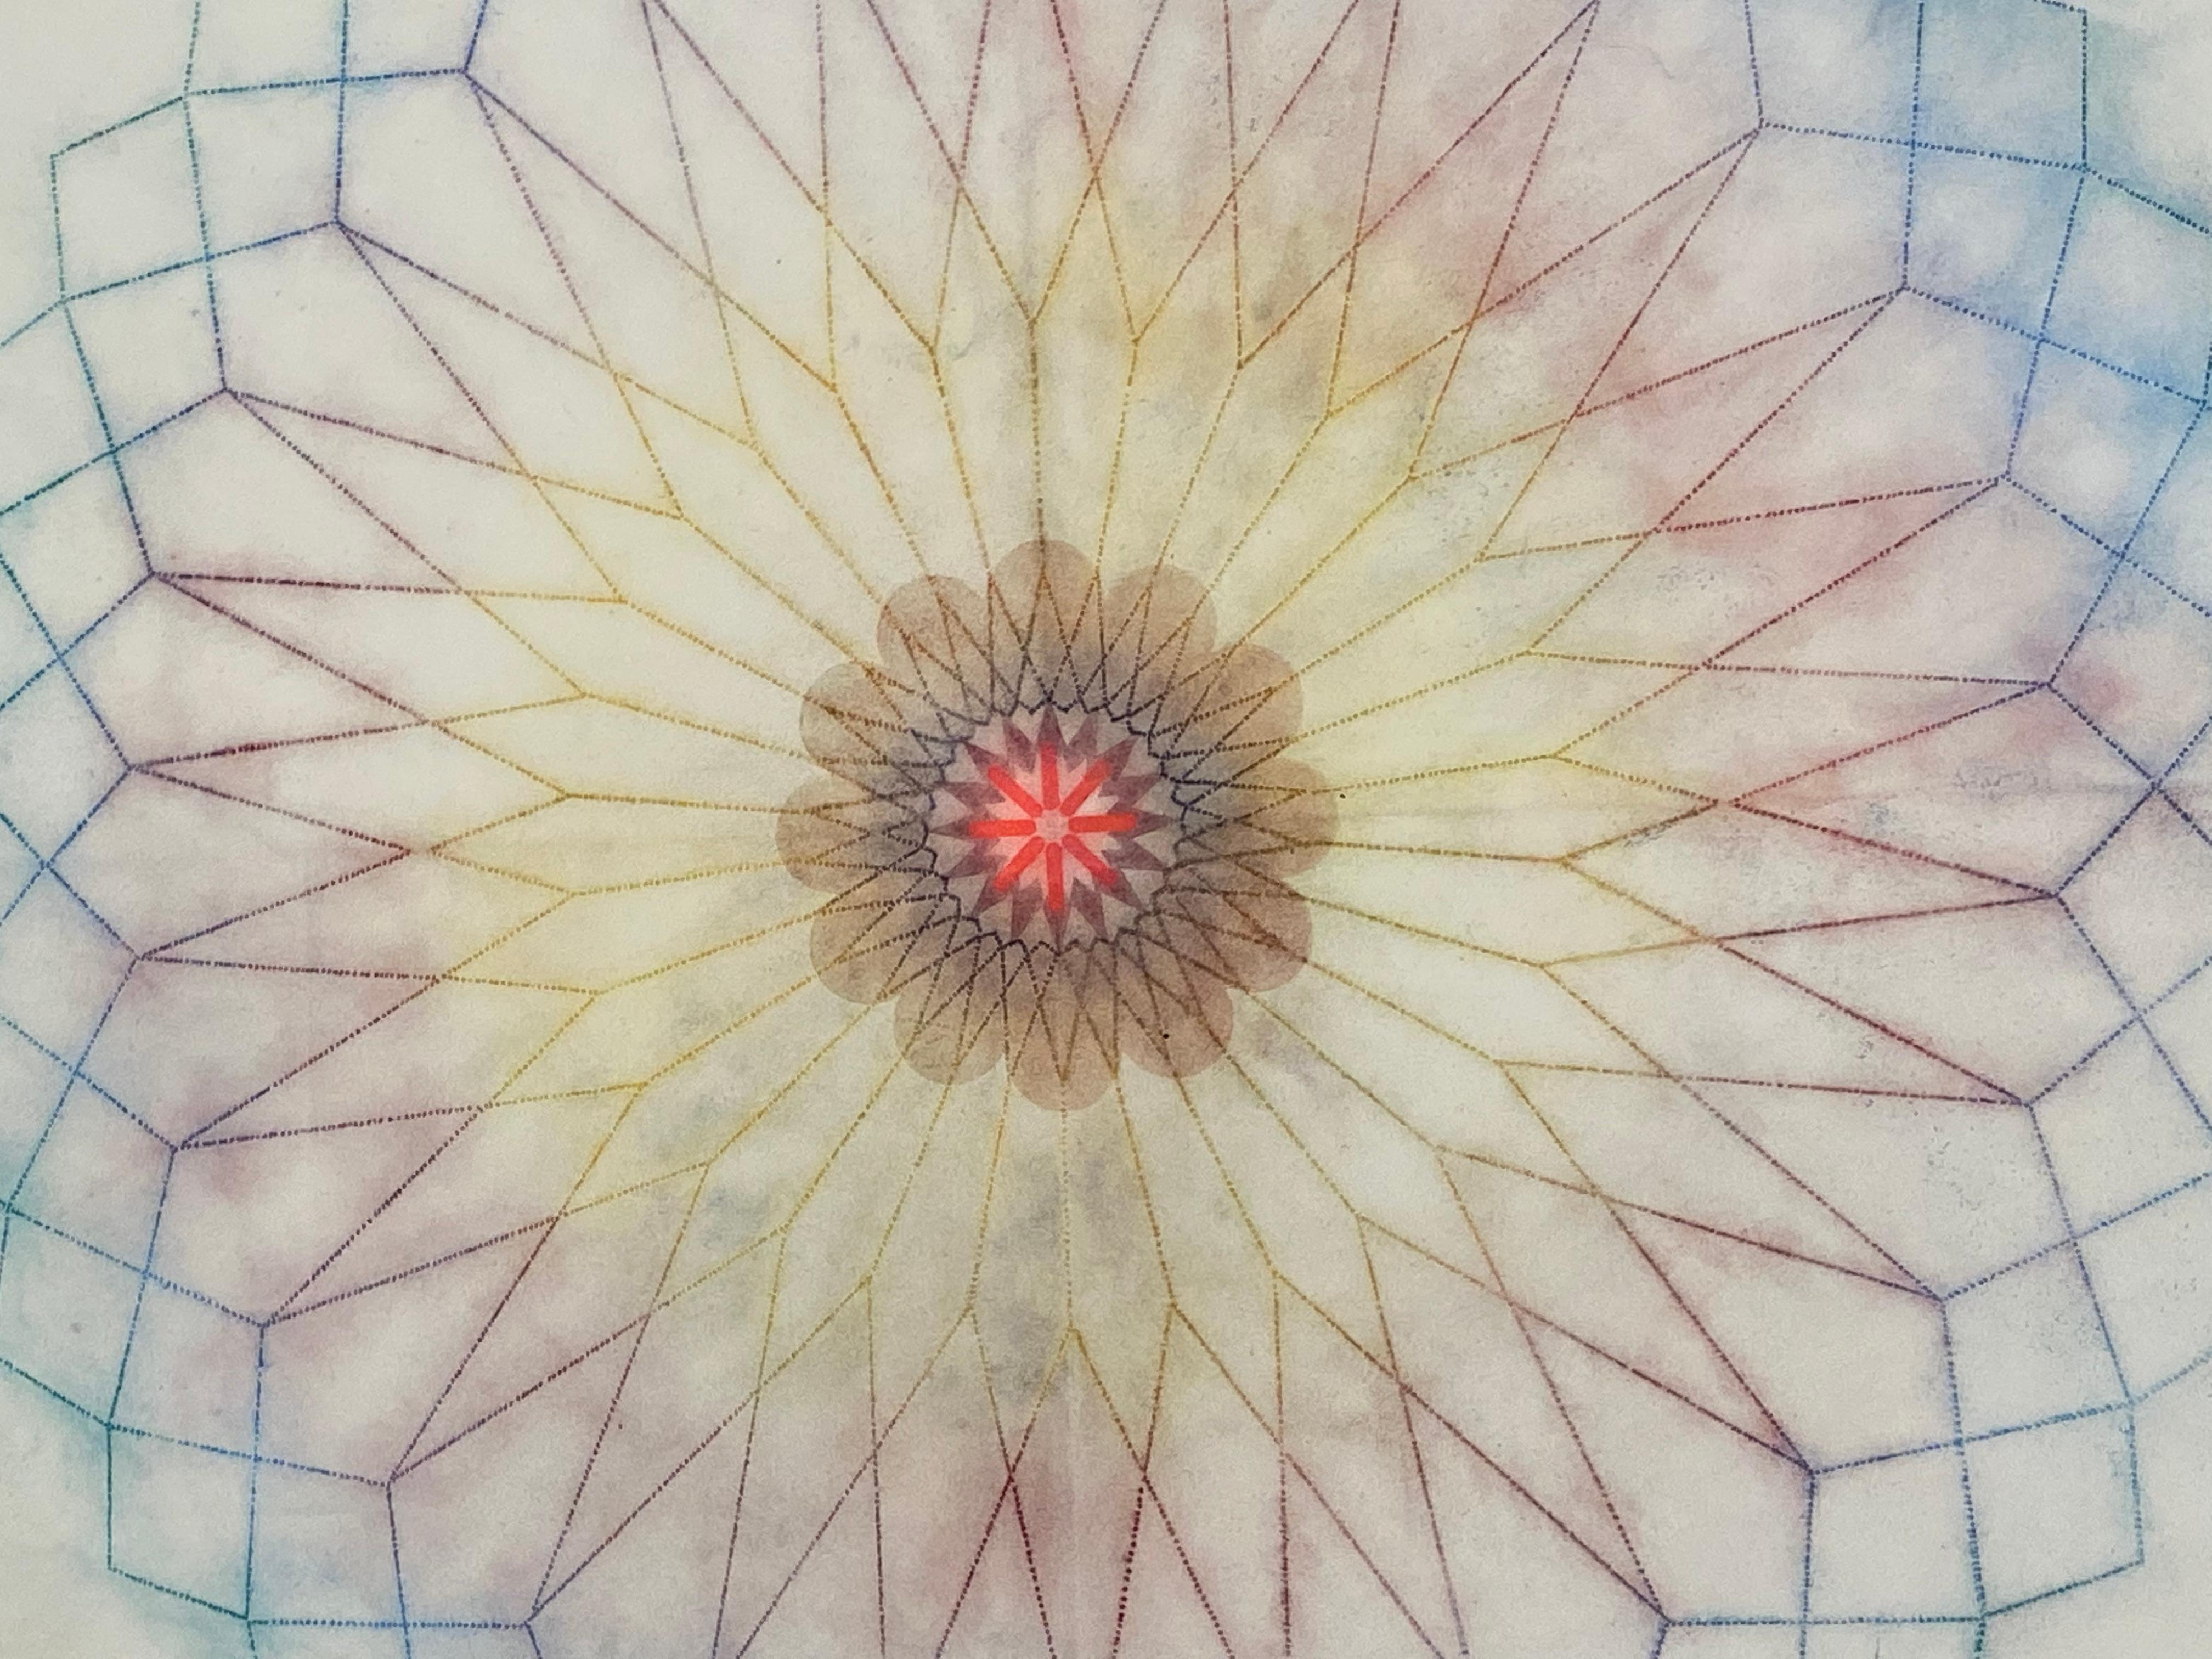 This multicolored drawing has a beautiful, soft mottled texture created with Judge's unique powered pigment technique. Primavera Pop 18 is a teal blue, violet, dark red, golden yellow geometric flower mandala shape with neon red and light brown at